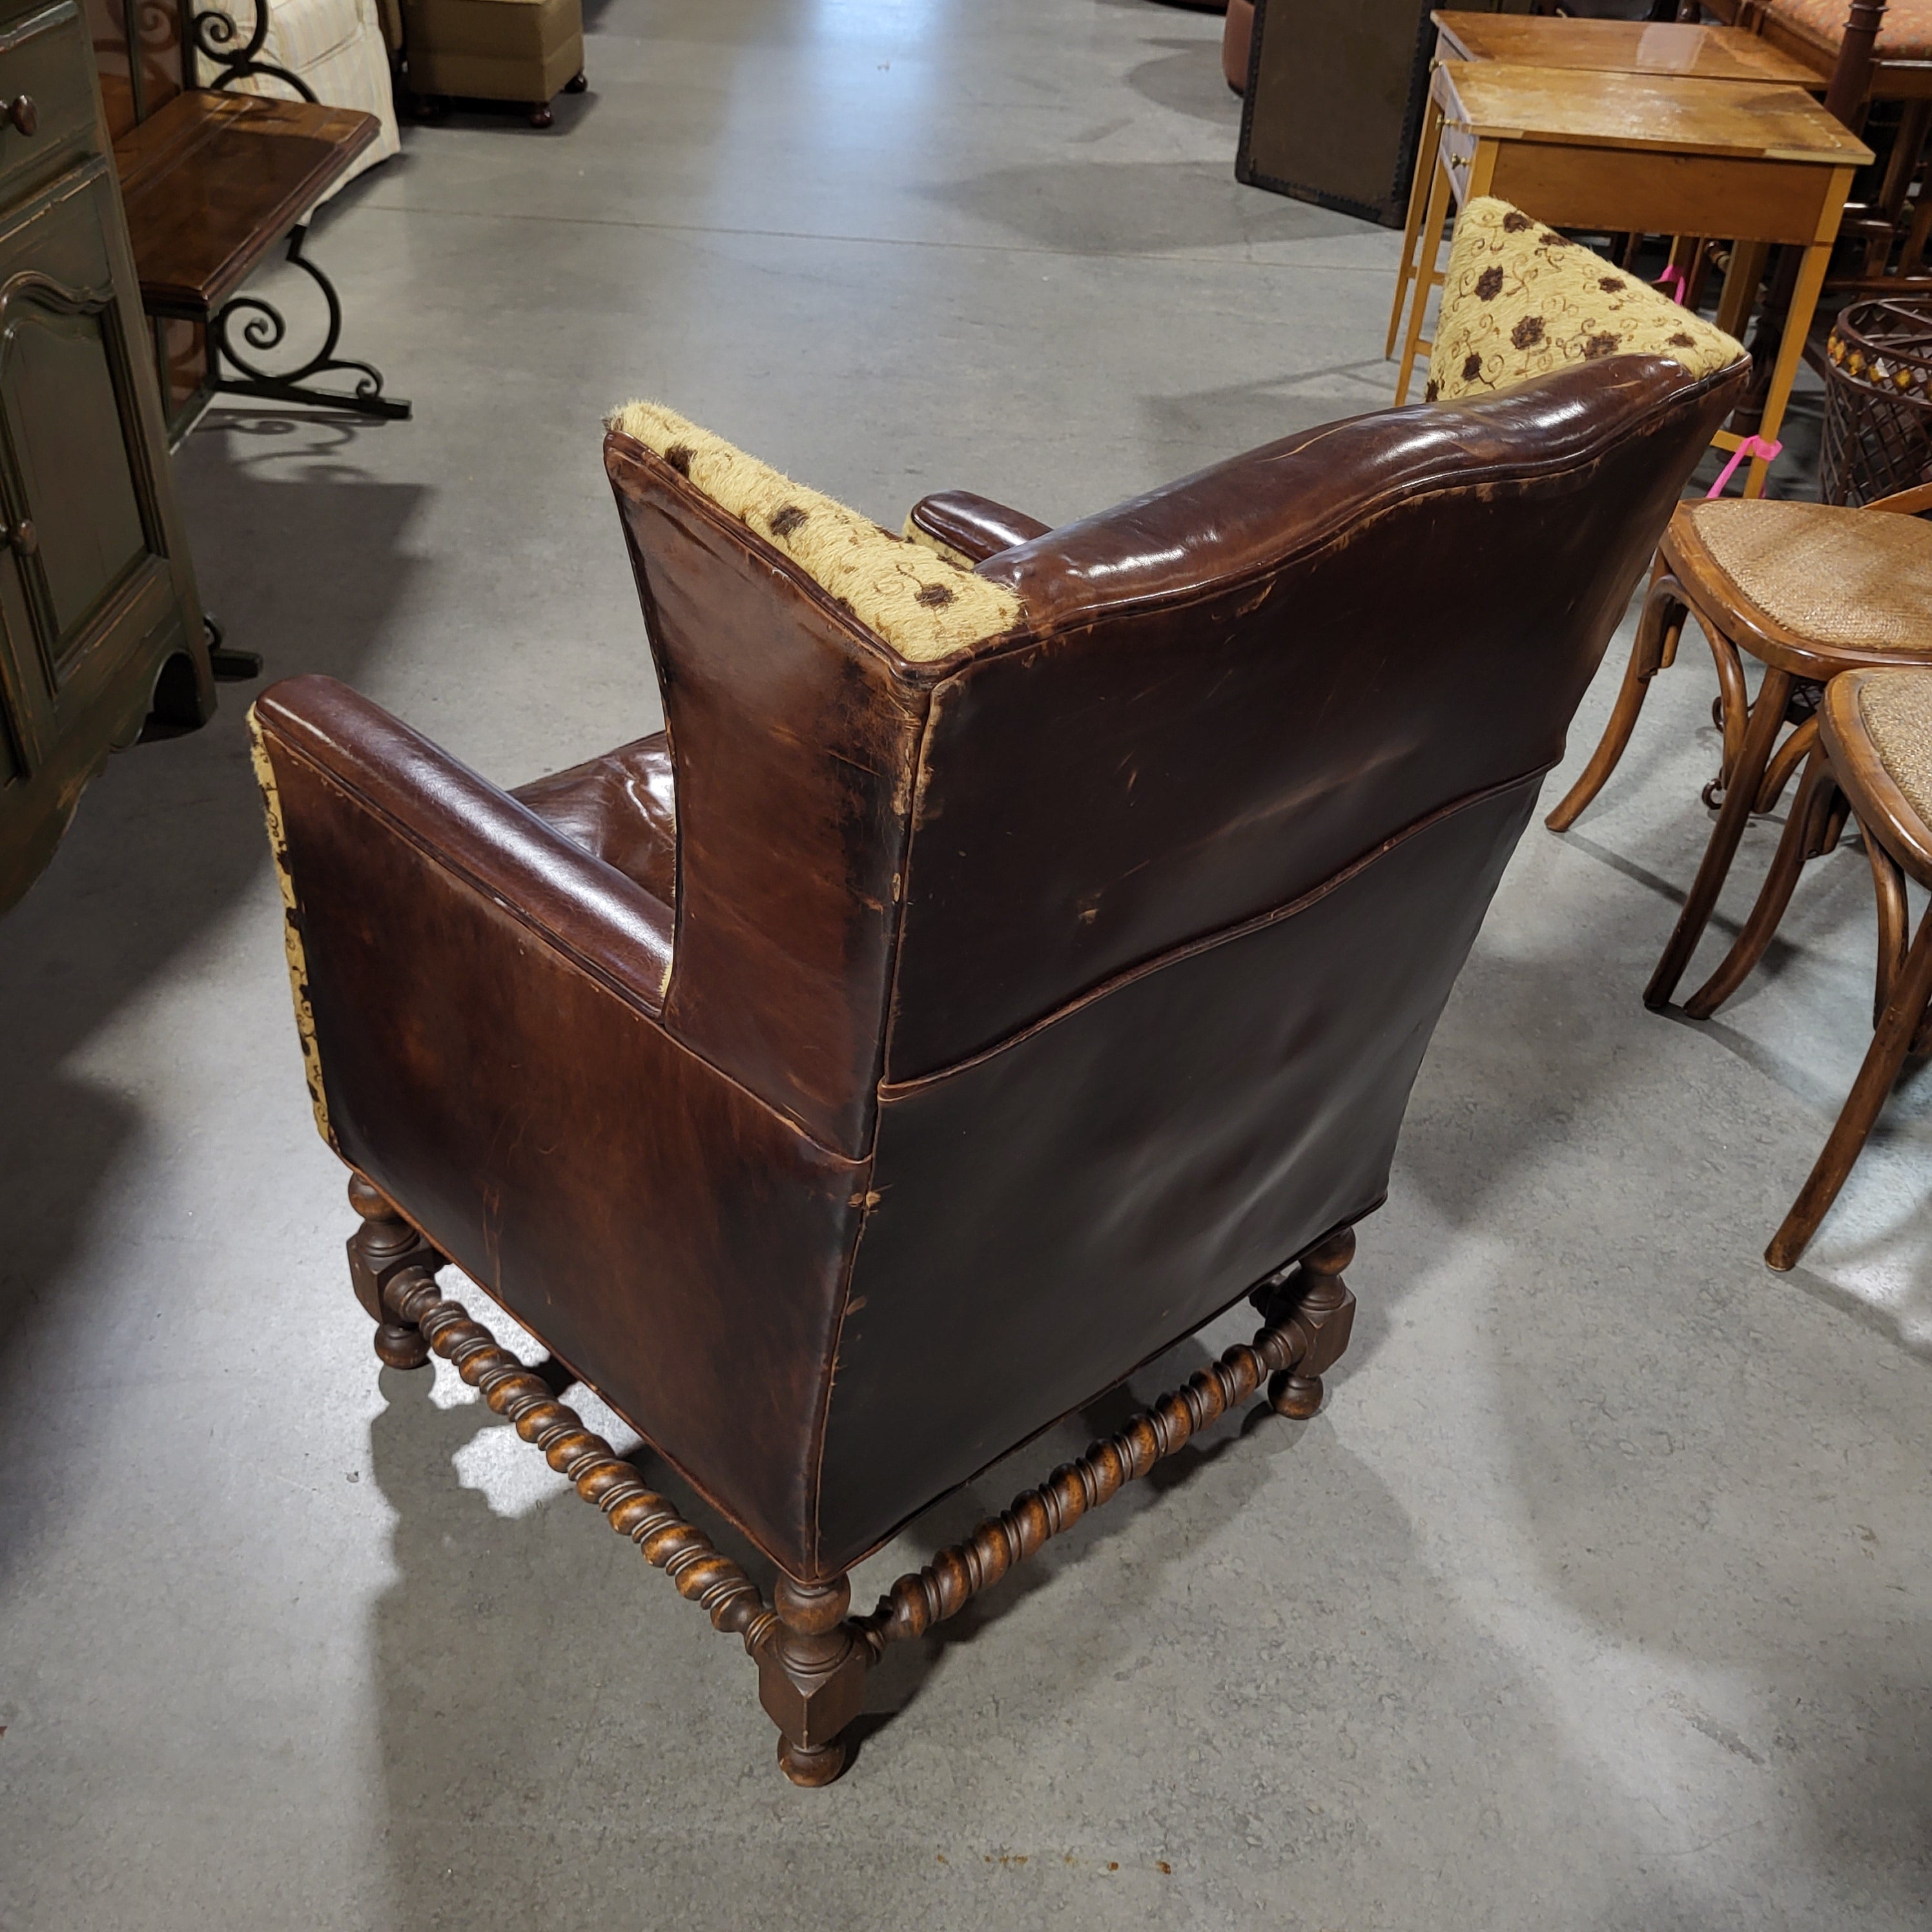 Old Hickory Leather Chair 27"x 30"x 39"